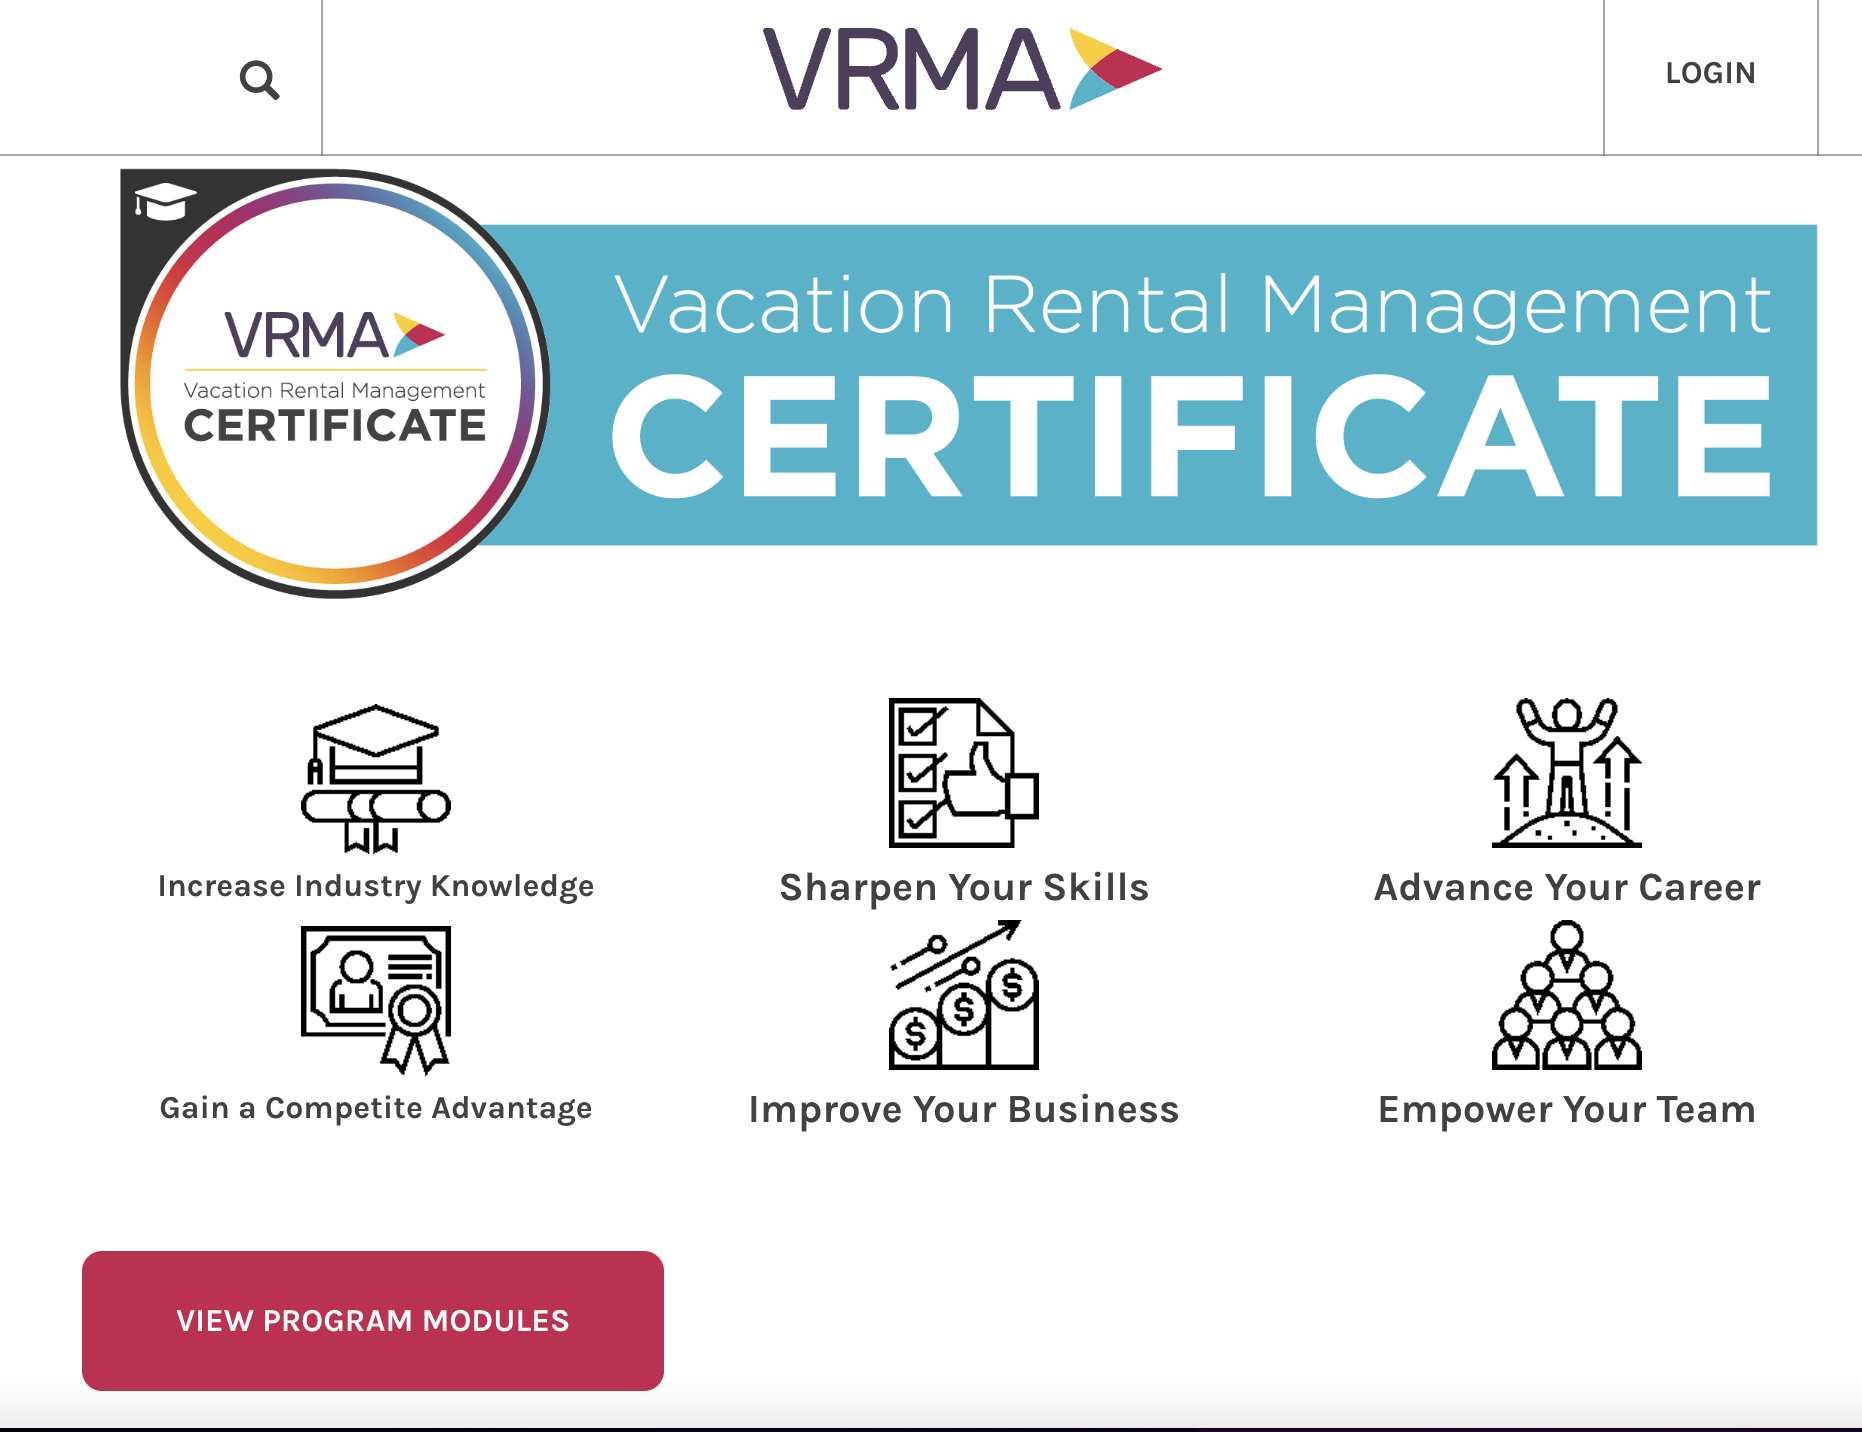 Home page for VRMA certification courses